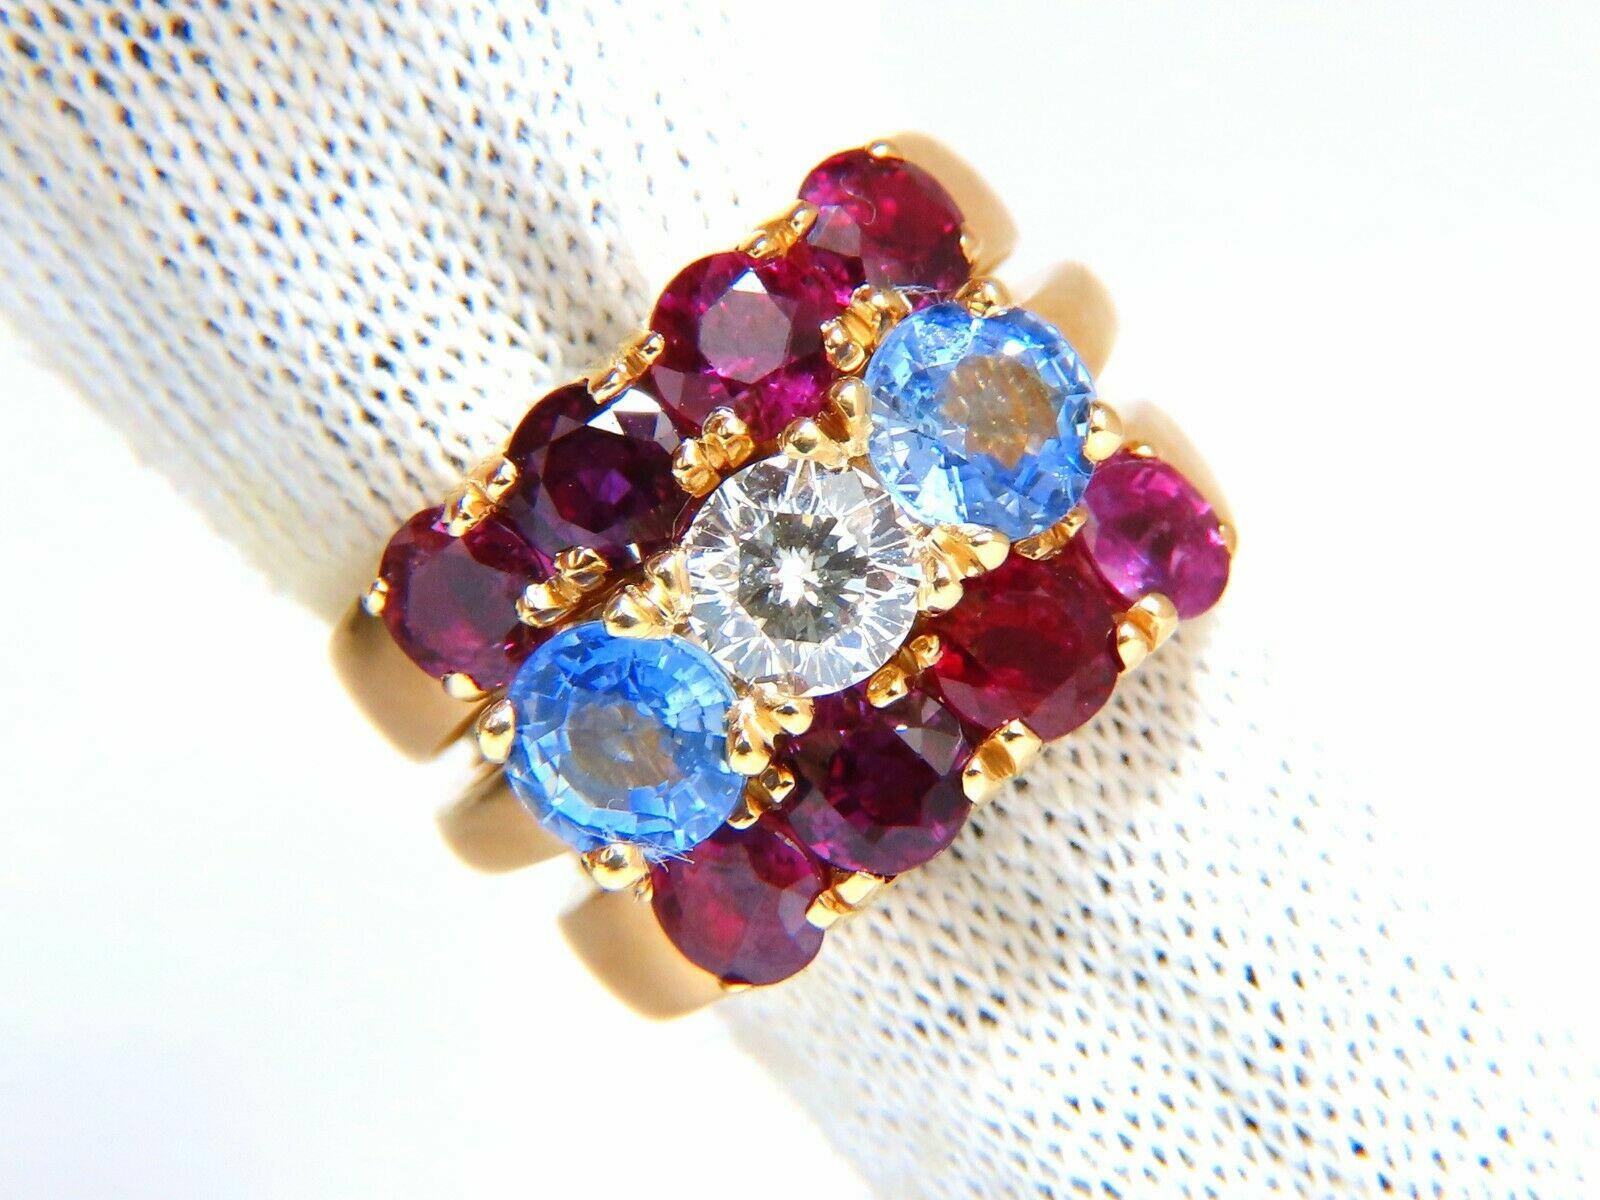 stackable Rings

3.50ct. round cut Natural Rubies,

1.60ct  (2) Sapphires

.50ct Diamond

G-color Vs-2 Clarity

Three rings.

(VS) Clean Clarity 

Transparent & Vivid colors.

14kt yellow gold

11.6 grams.

Rings put together:  13mm wide

current